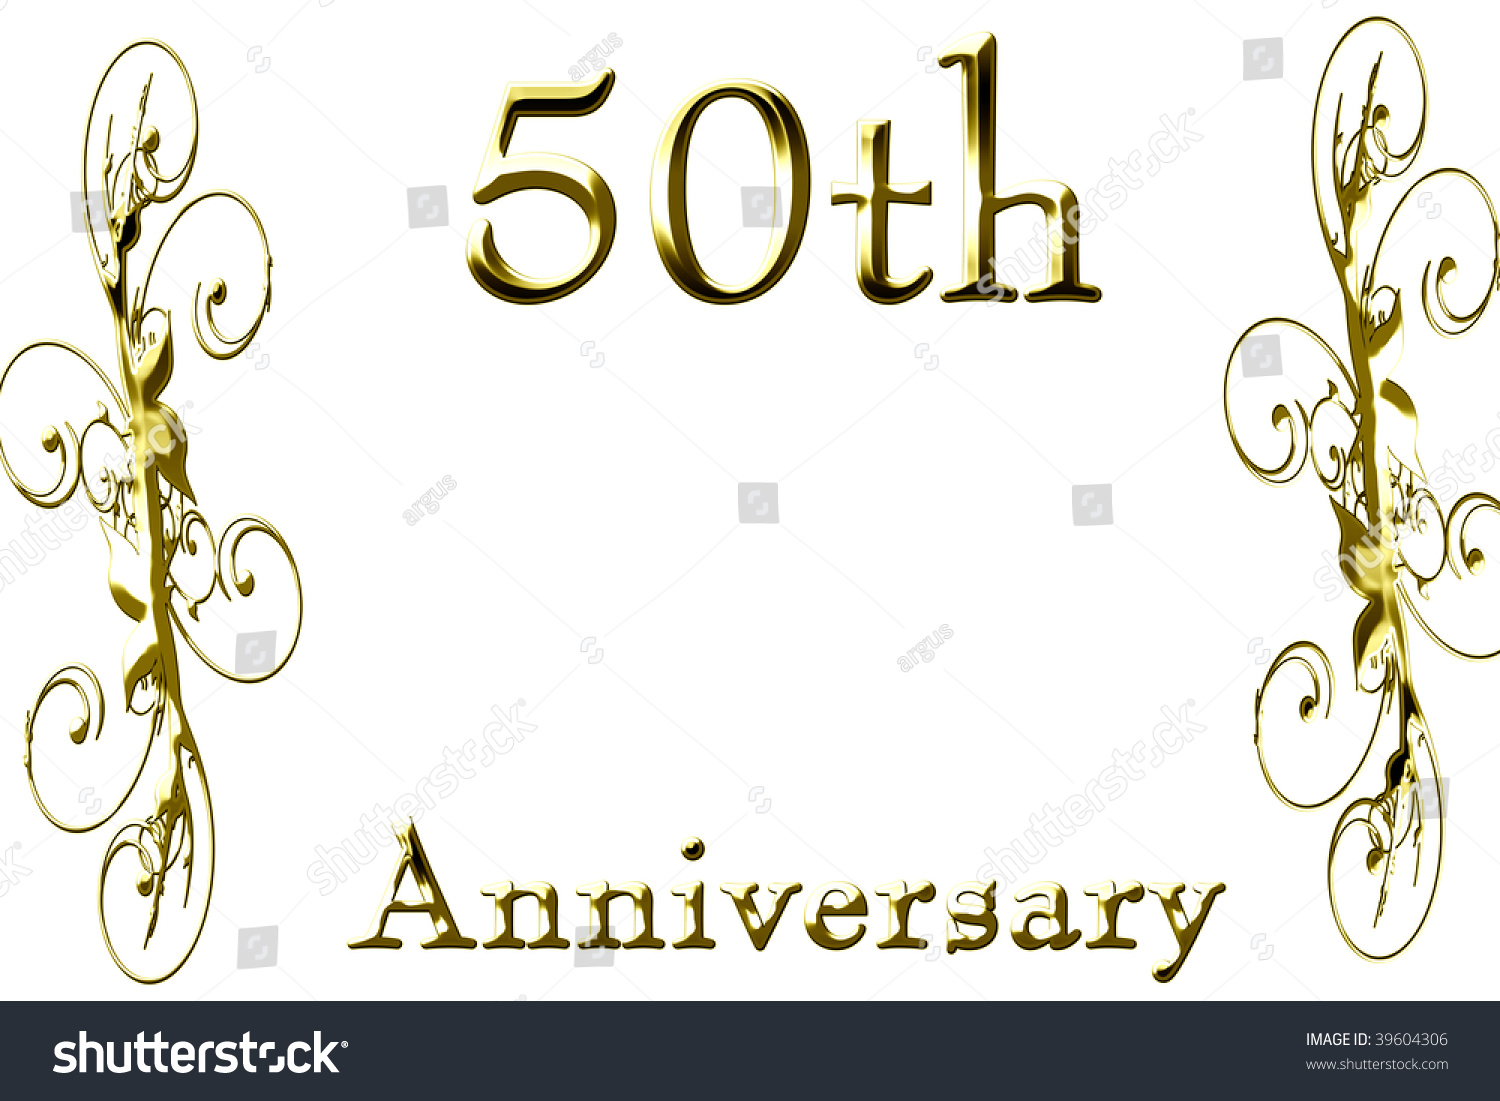 50th Anniversary On A Solid White Background Stock Photo 39604306